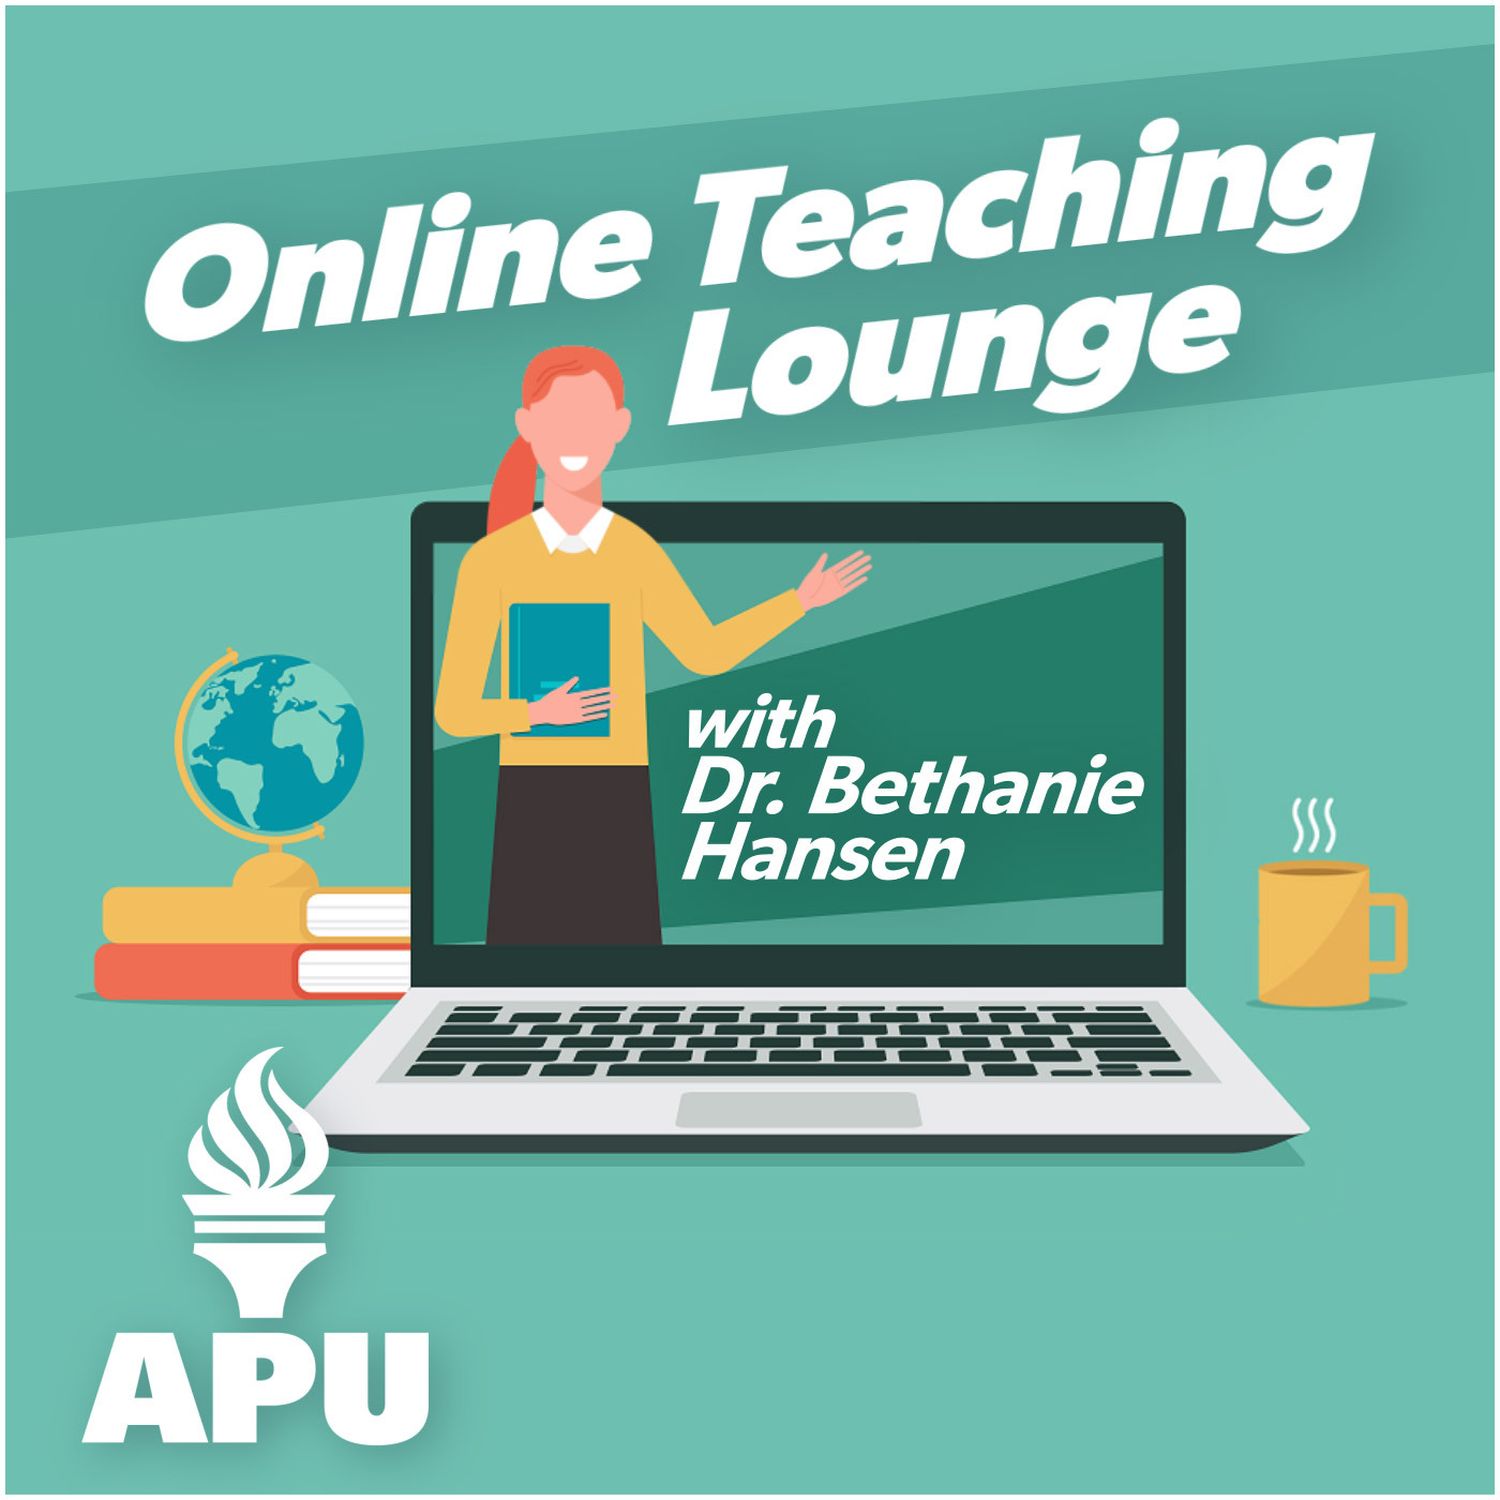 The Online Teaching Lounge